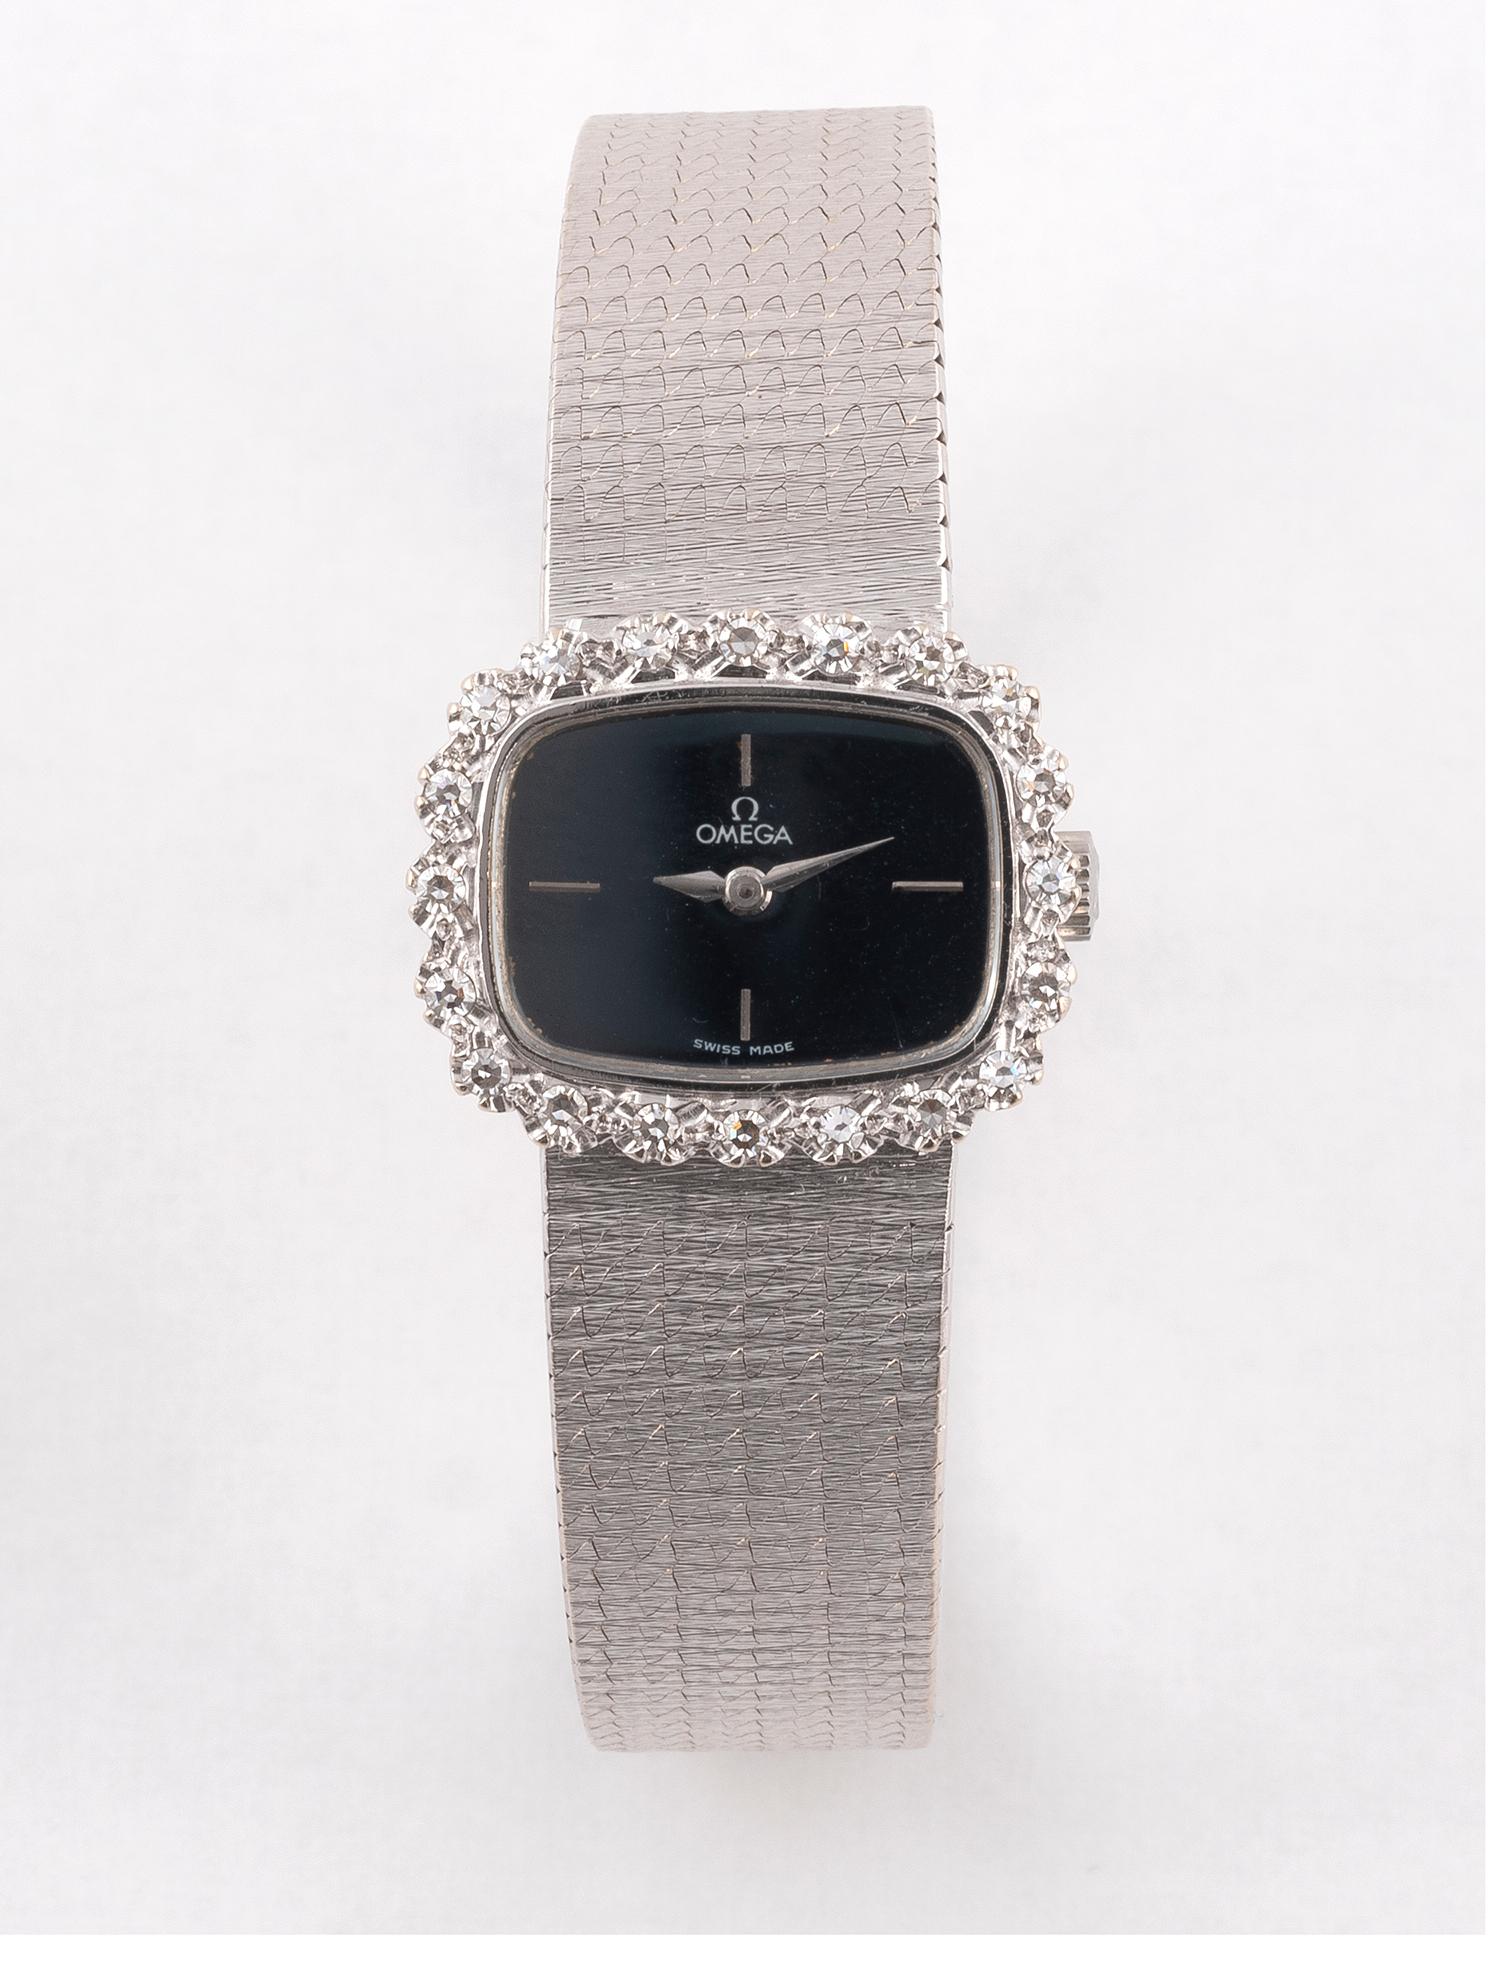 Brilliant Cut Omega 18kt White Gold and Diamond Cocktail Watch